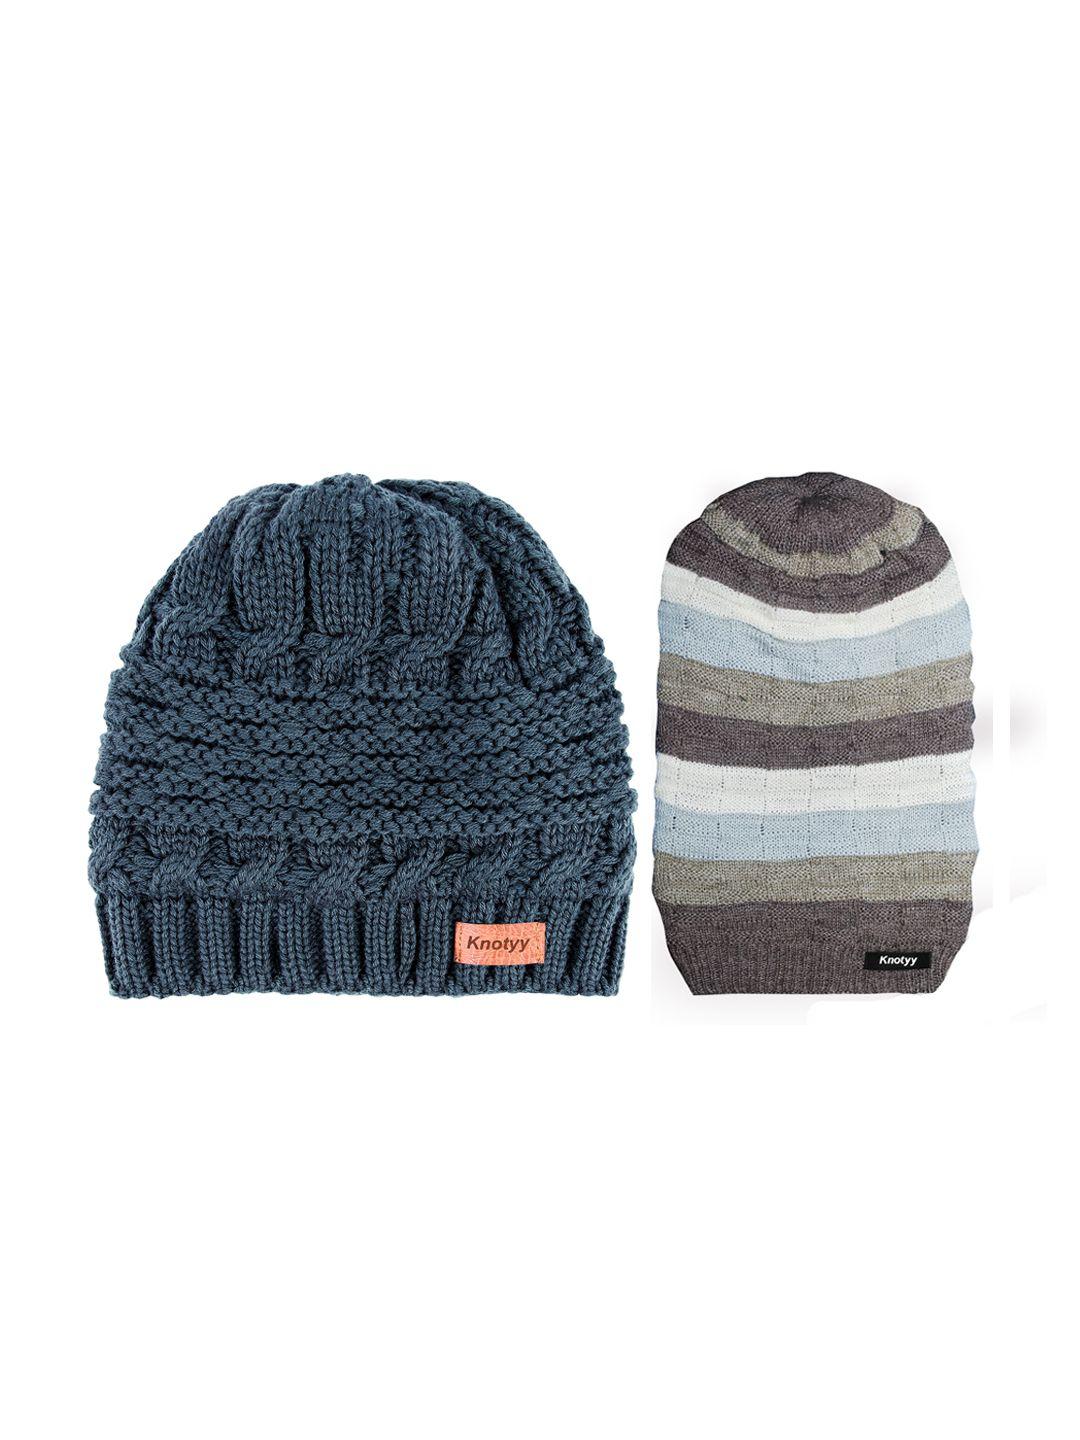 knotyy men pack of 2 blue & brown solid beanies